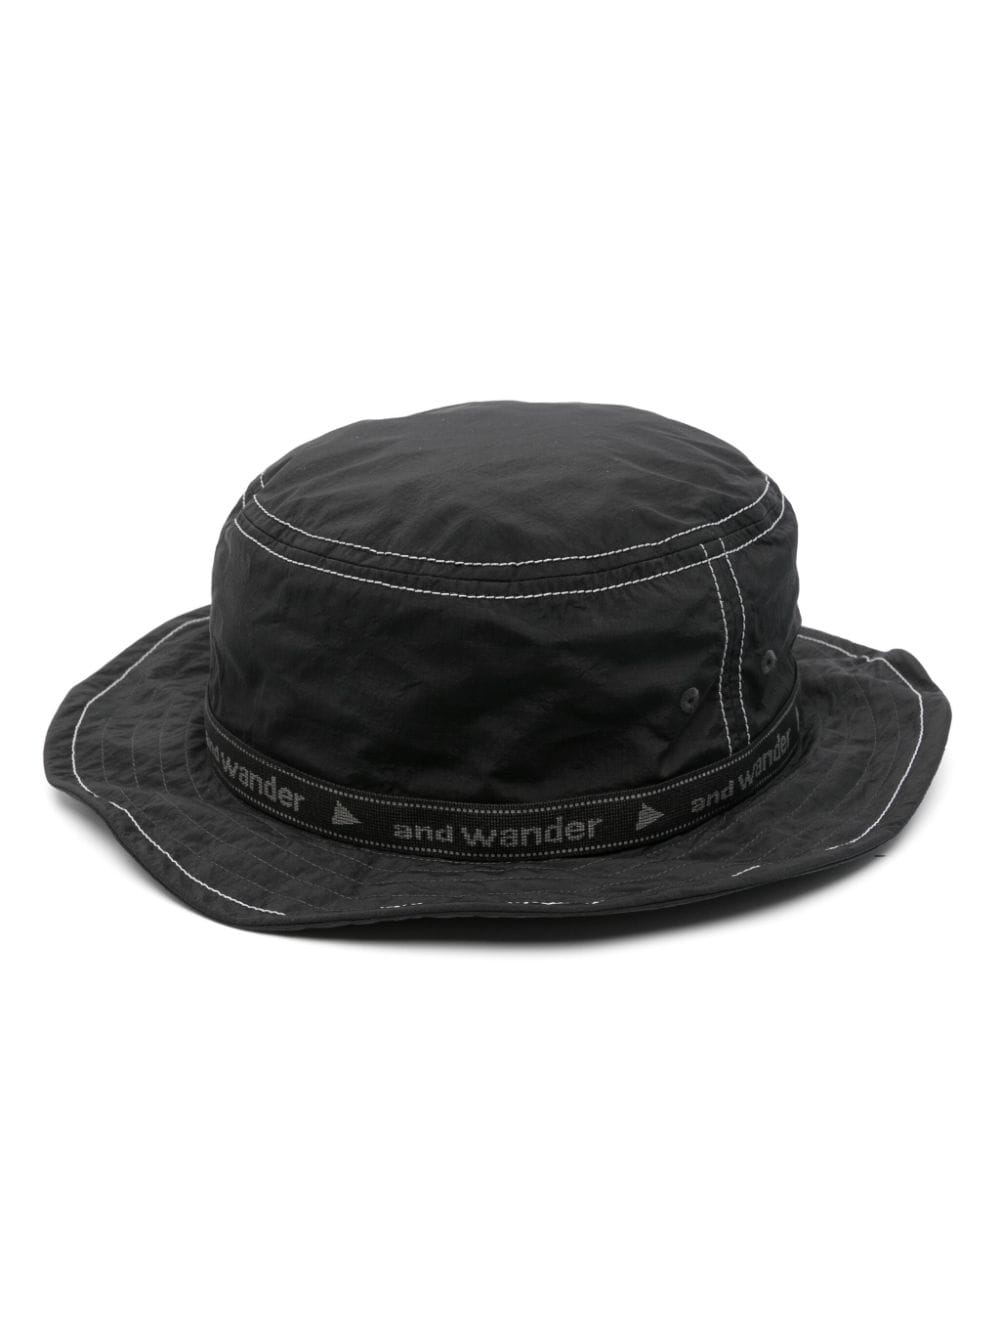 AND WANDER LOGO-TAPE CONTRAST-STITCHING BUCKET HAT